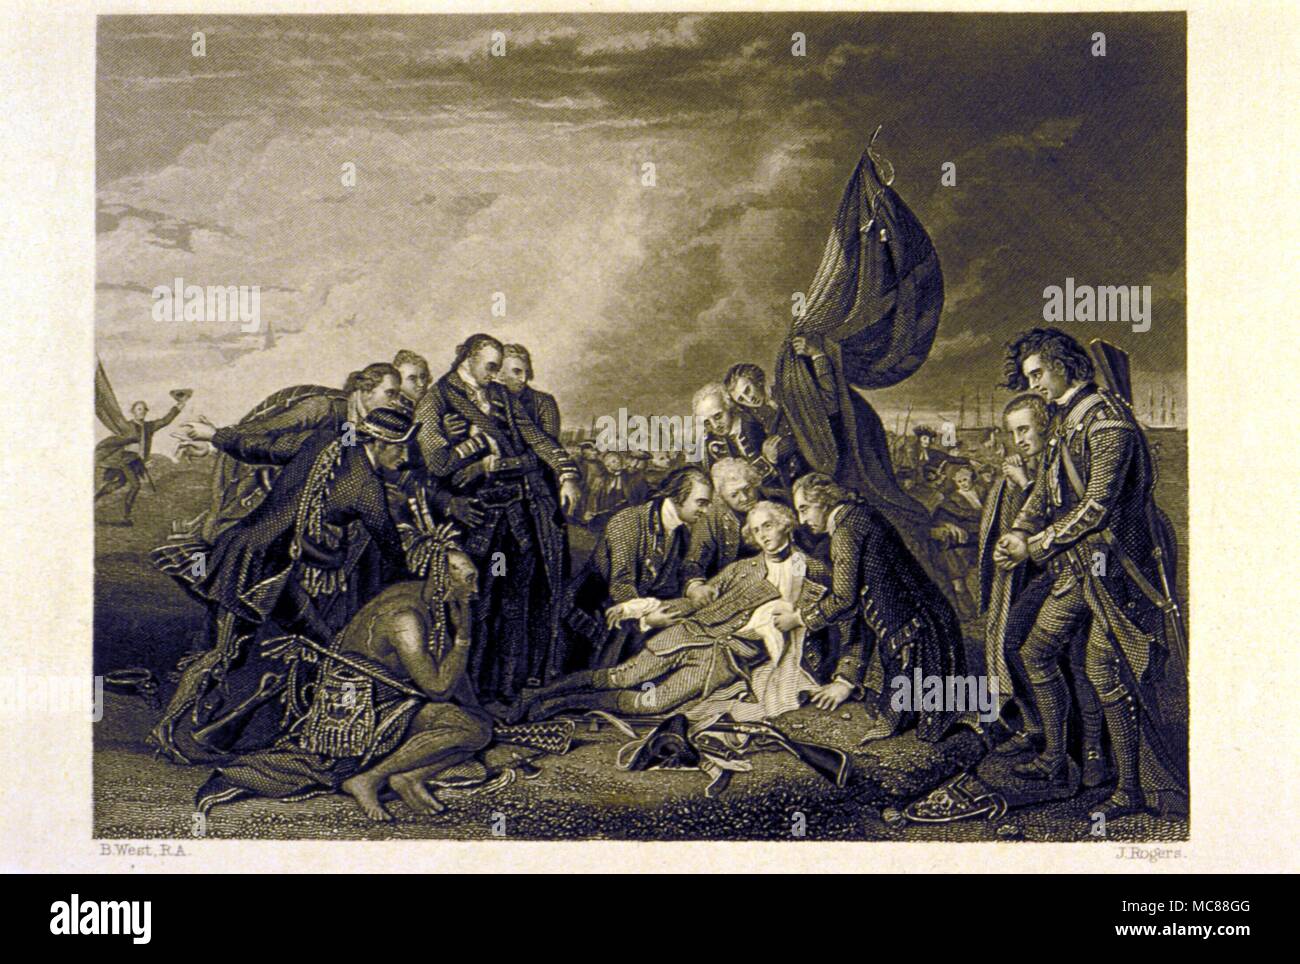 HISTORY - BRITISH 'The Death of General Wolfe'. Steel engraving by J. Rogers after the painting by Benjamin West. Engraving circa 1855. Stock Photo